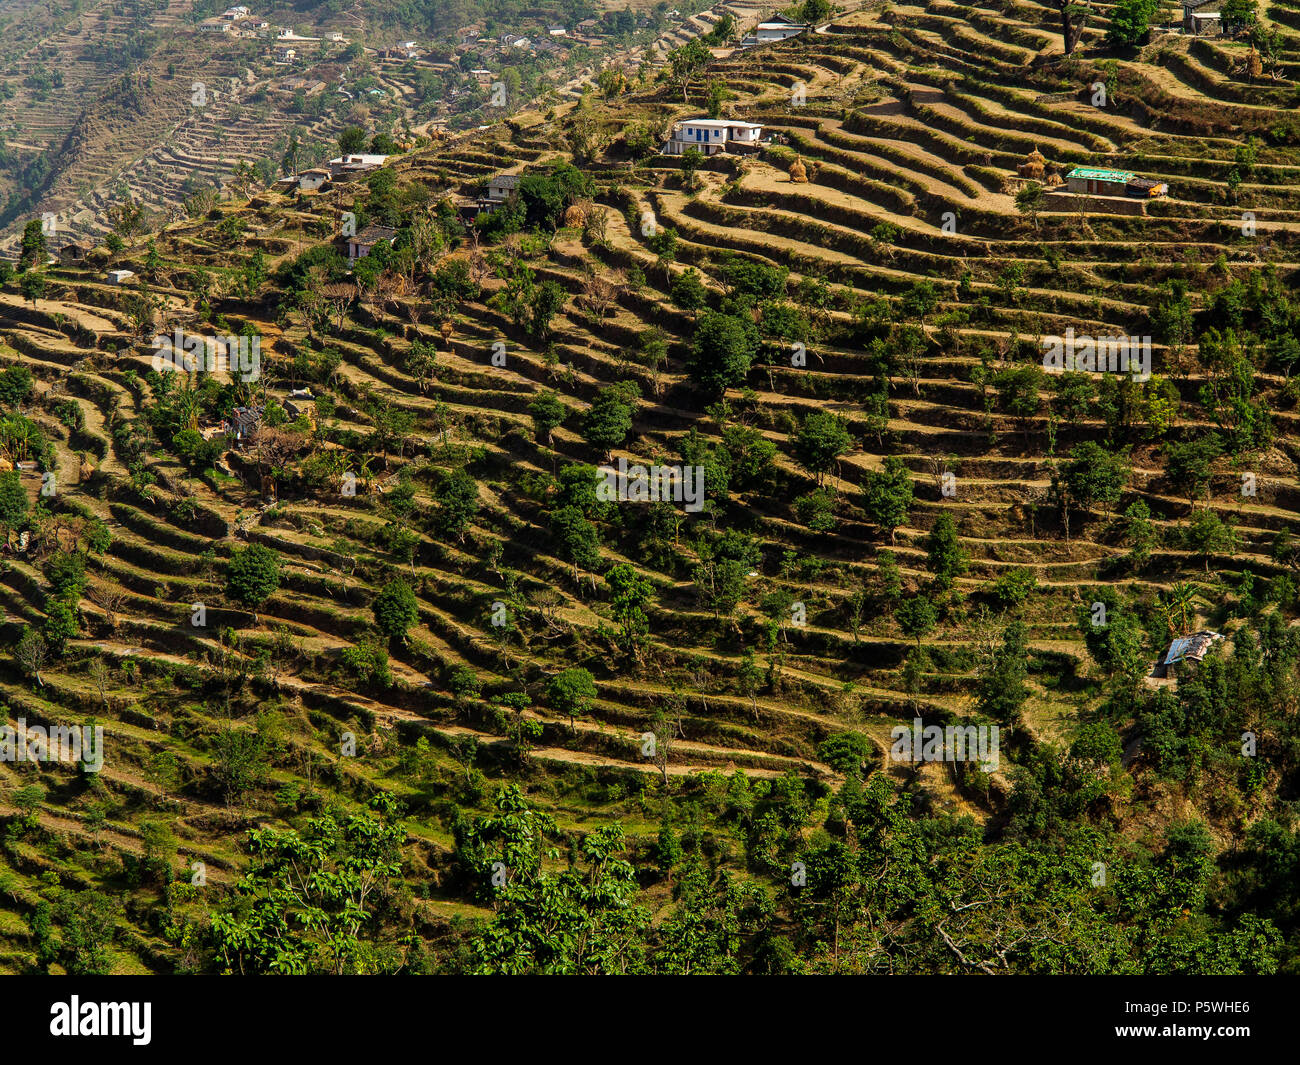 Extensive terraced fields area at the remote village of Dalkanya on the Nandhour Valley, Kumaon Hills, Uttarakhand, India Stock Photo